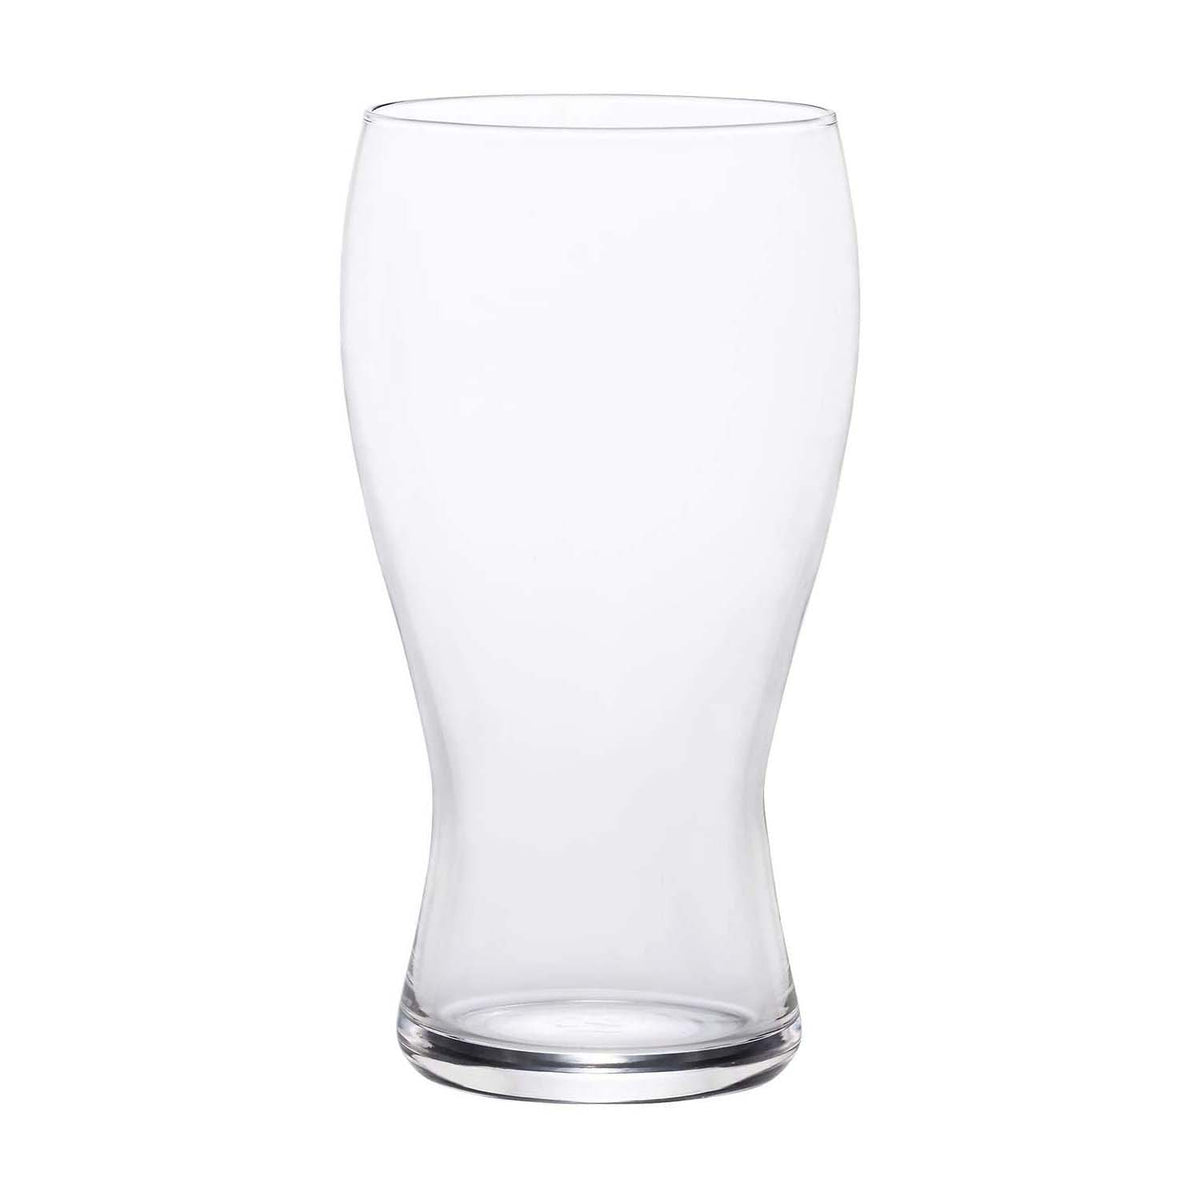 ADERIA Craft Beer Glass for Thick Taste